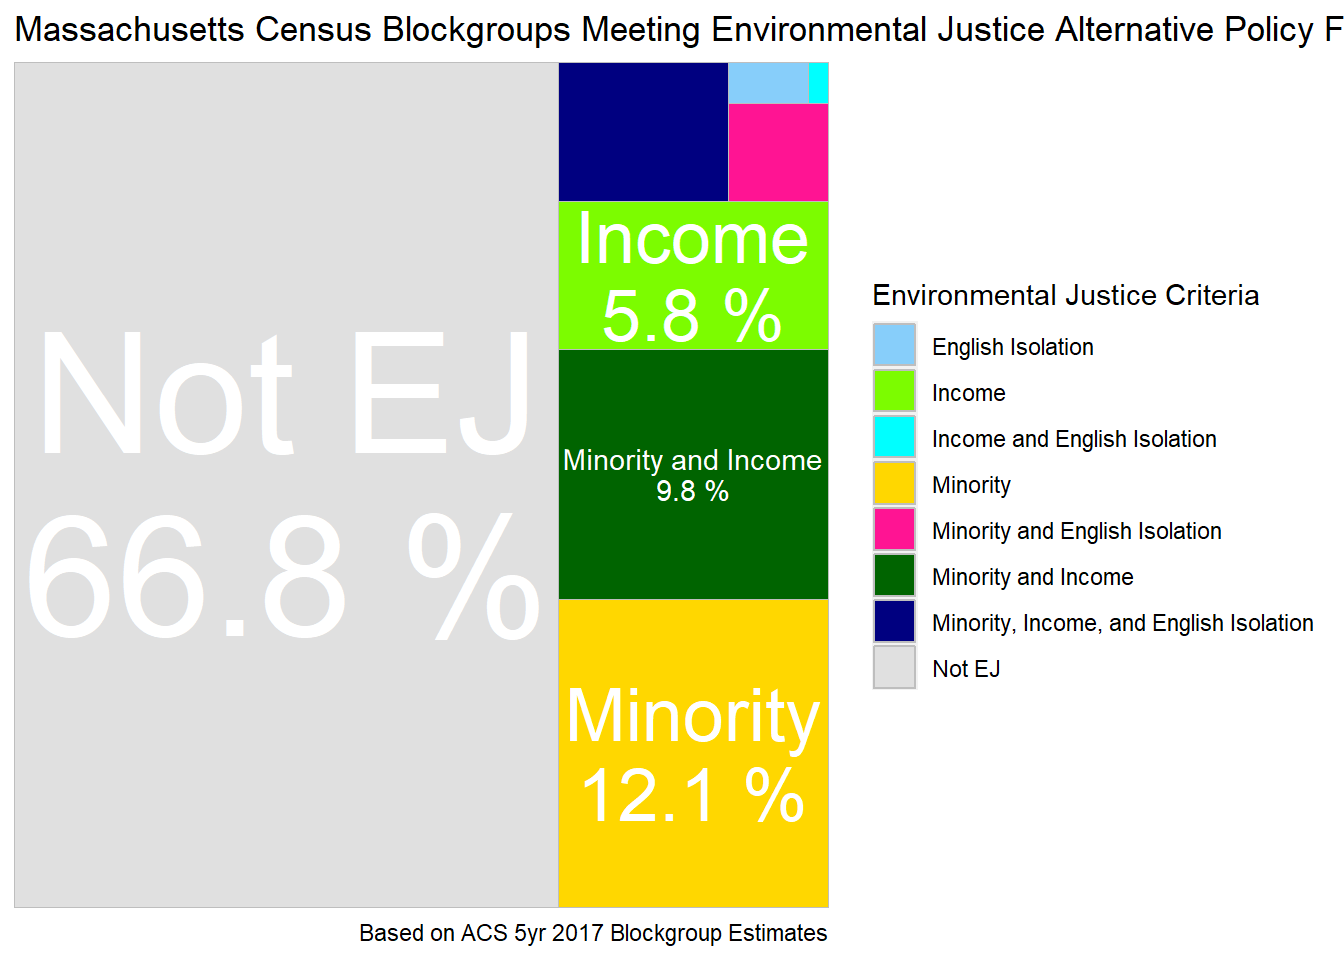 Tree map of block groups classified as environmental justice by Environmental Justice Alternative Policy F - Modify Minority30 Criteria by Income125.